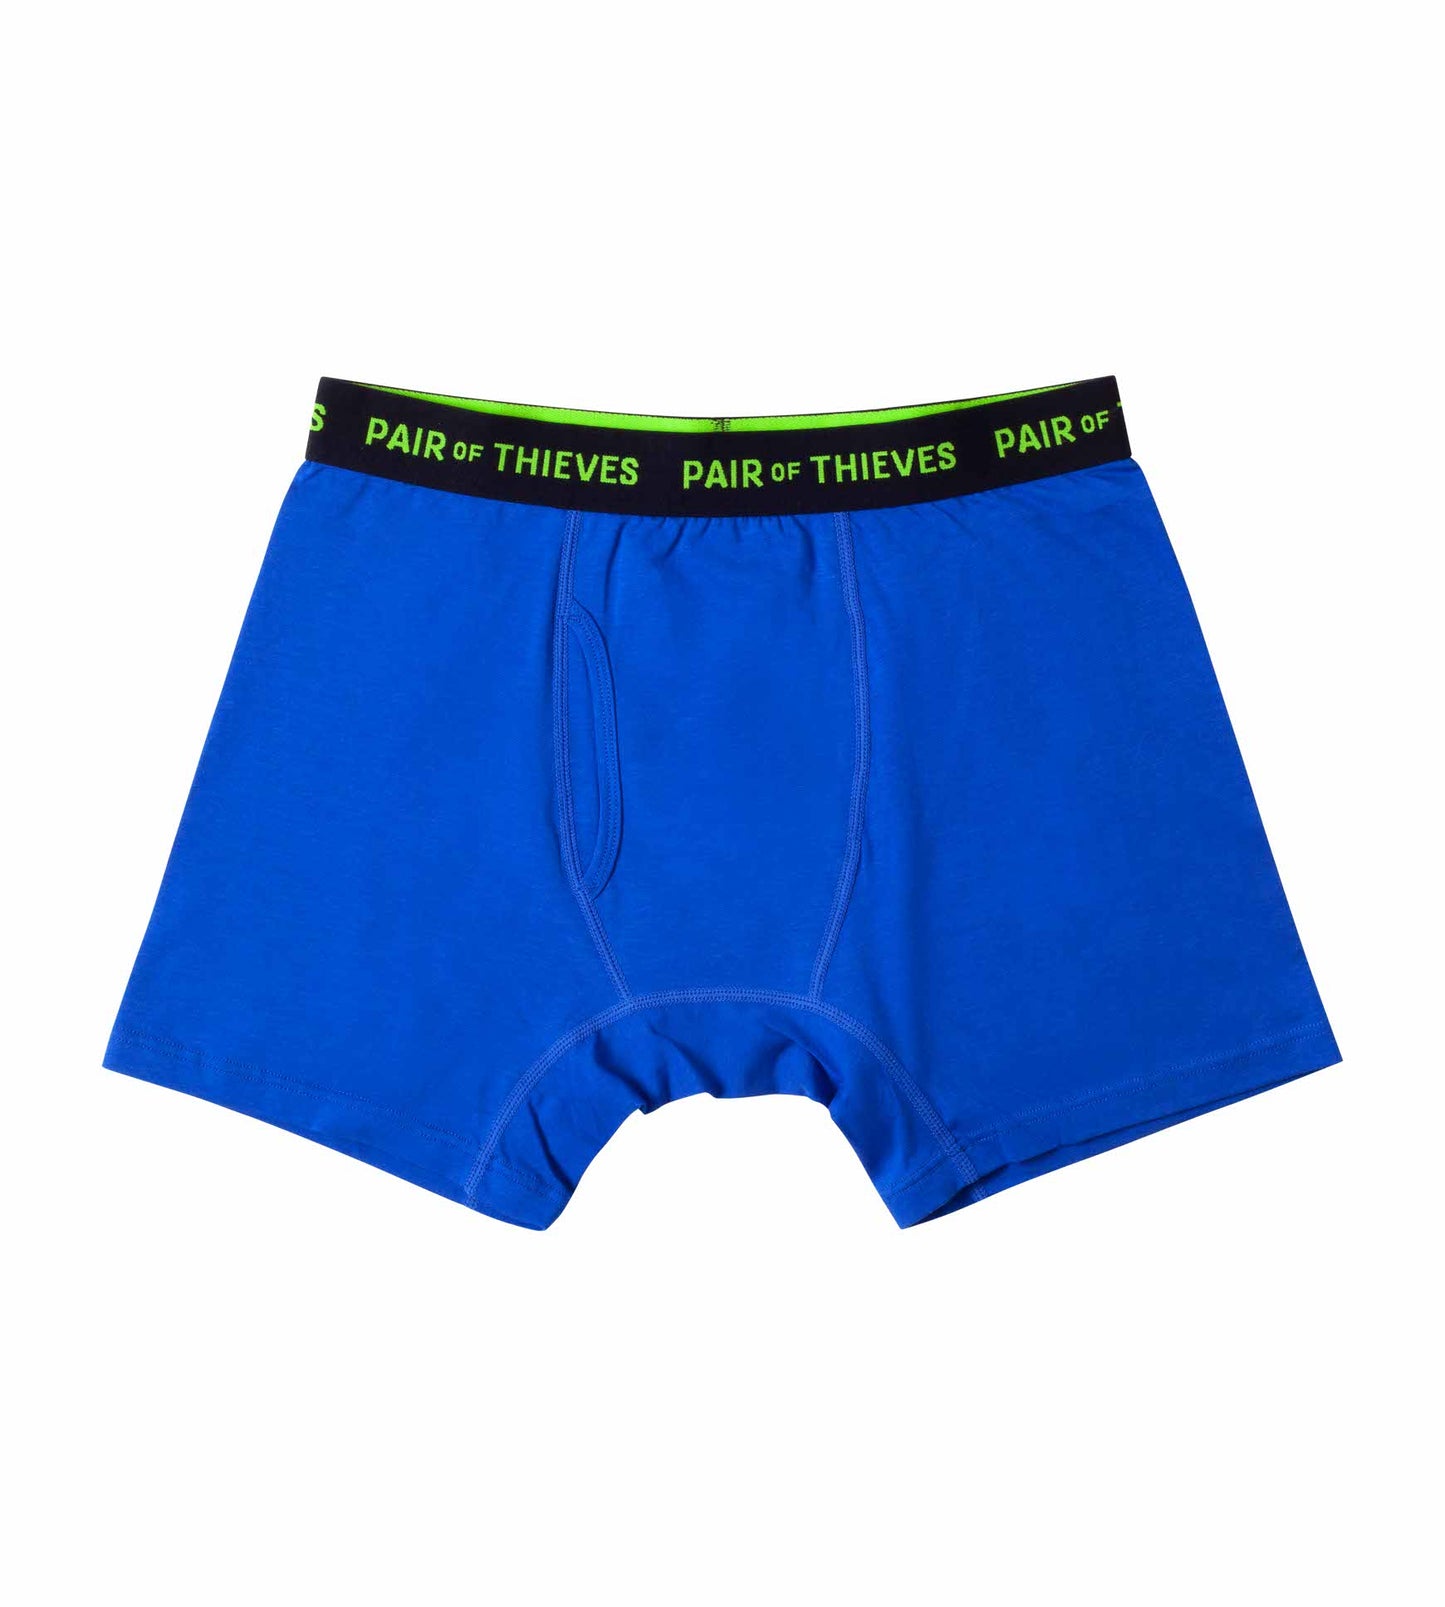 Supersoft Boxer Briefs 2 Pack